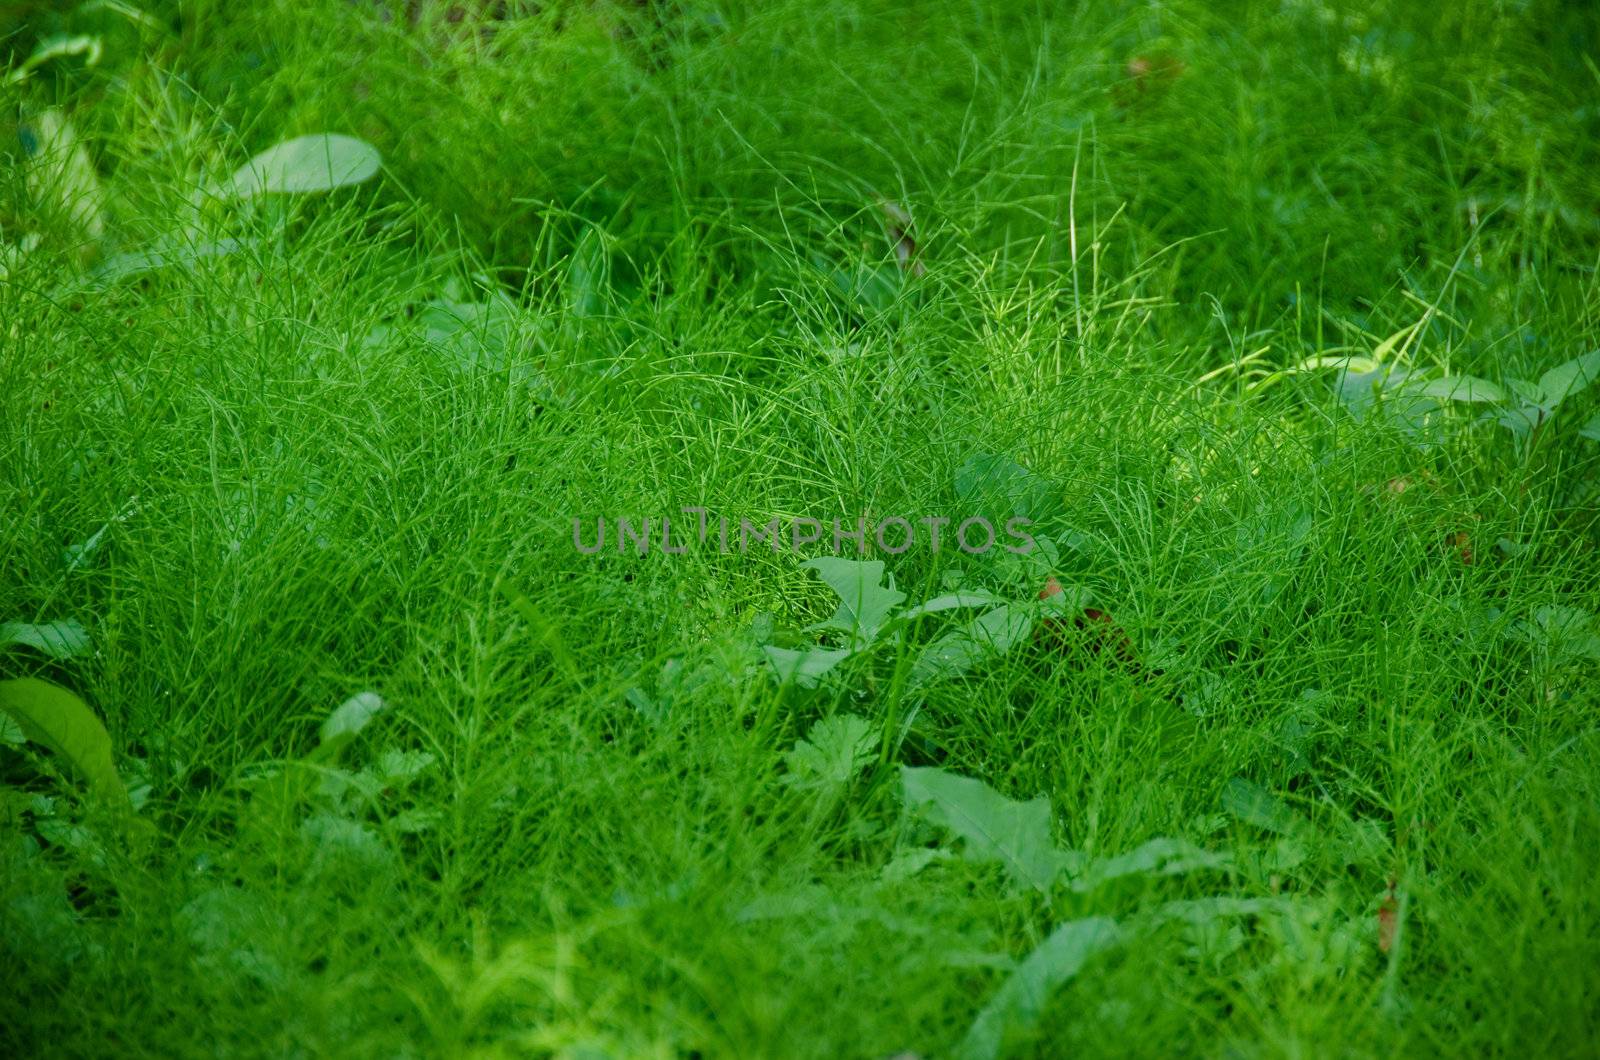 Natural green background composed of Equisetum (horse tail) in the understory of a forest